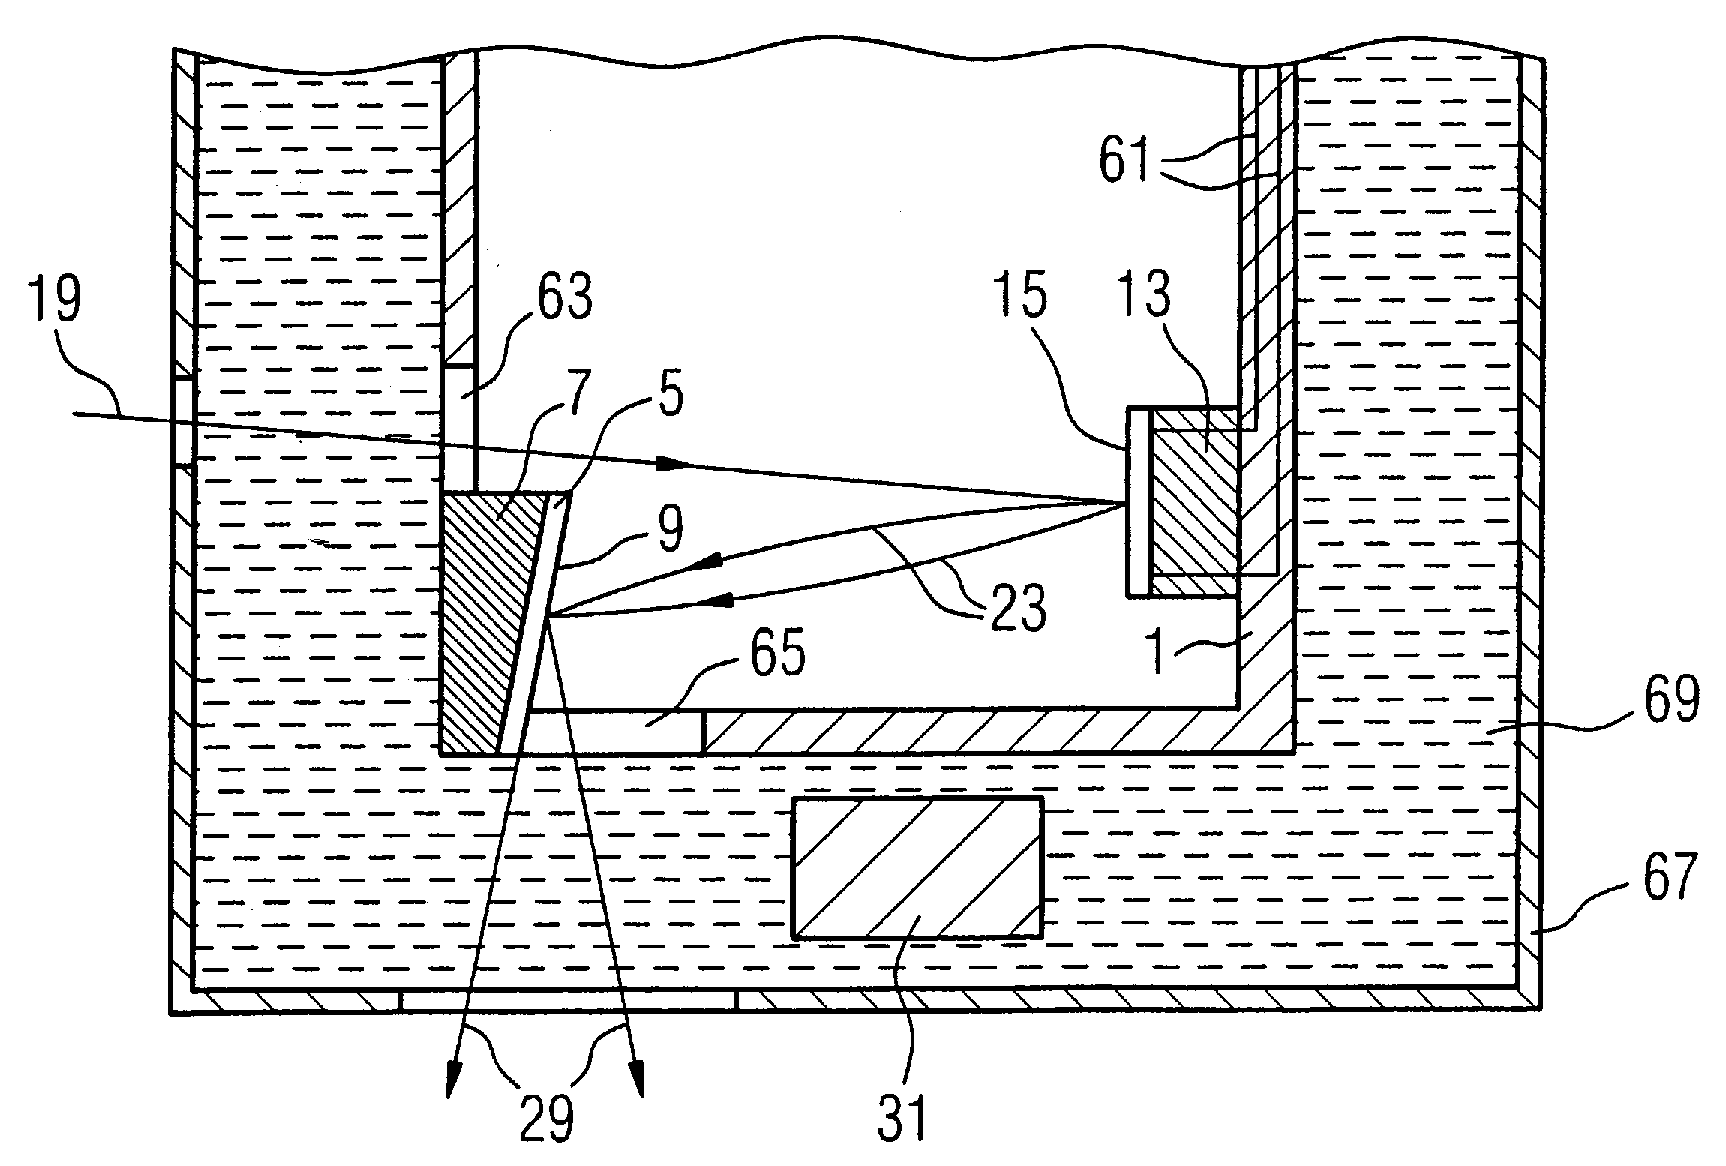 X-ray radiator with a photocathode irradiated with a deflected laser beam